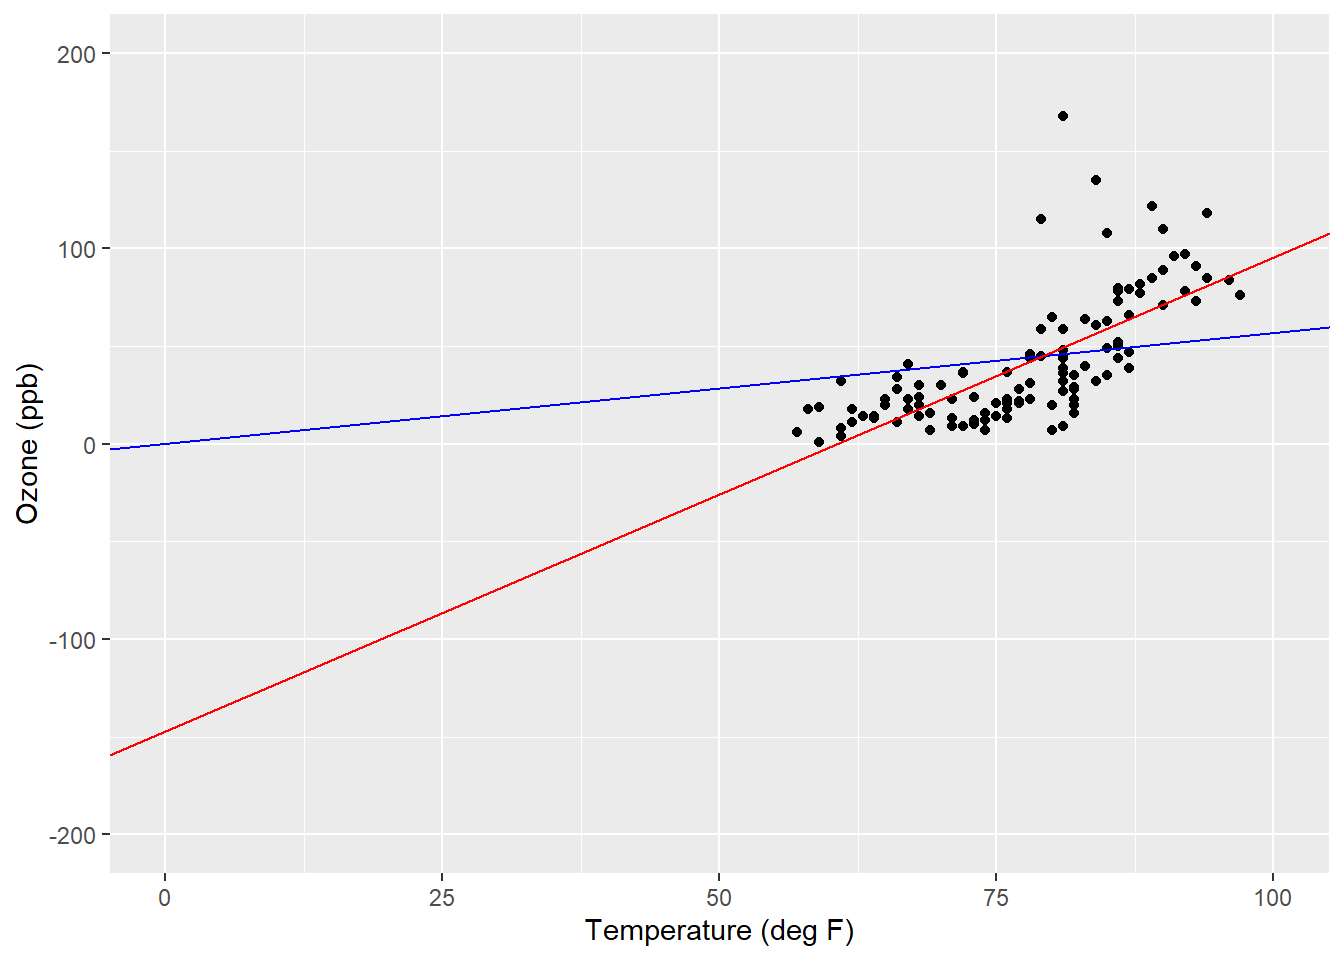 Regression lines showing y-intercept values for a simple proportions model (blue) and simple linear regression model (red) applied to the ozone data.